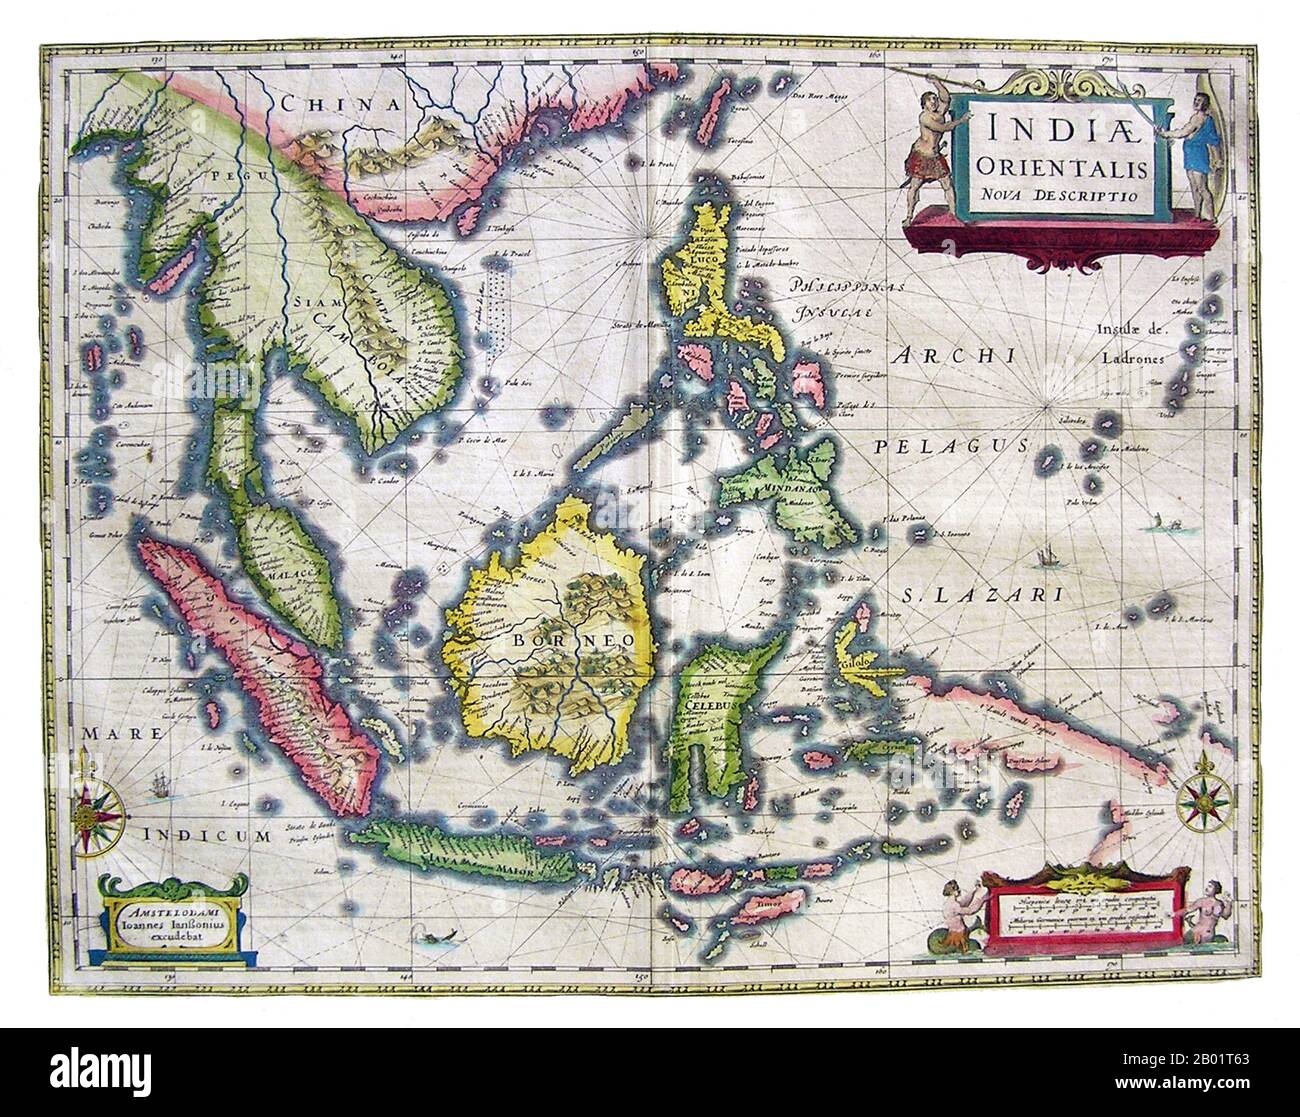 An early map of Southeast Asia showing the extent and limitations of European knowledge of the region. While the larger islands of Indonesia are charted with some accuracy, the southern coast of Java and the Lesser Sundas are charted only in general outline, and New Guinea is particularly incomplete.  In all areas we see coastal features and settlements, but there is little interior detail. The Philippines are well described, and the Mariana Islands (Ladrones) are given undue size and prominence. Stock Photo